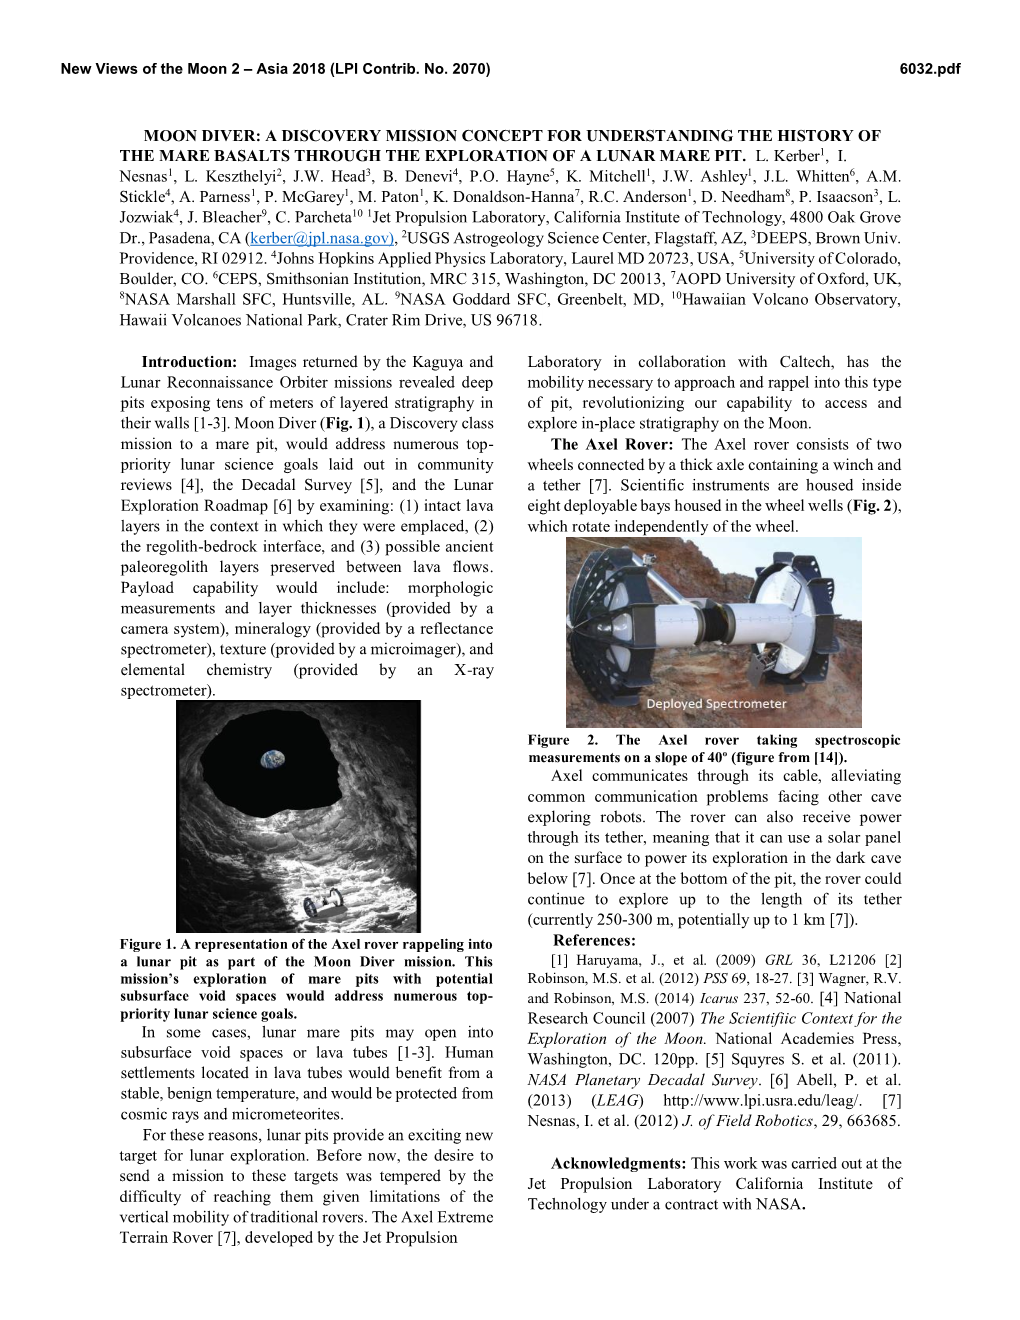 Moon Diver: a Discovery Mission Concept for Understanding the History of the Mare Basalts Through the Exploration of a Lunar Mare Pit